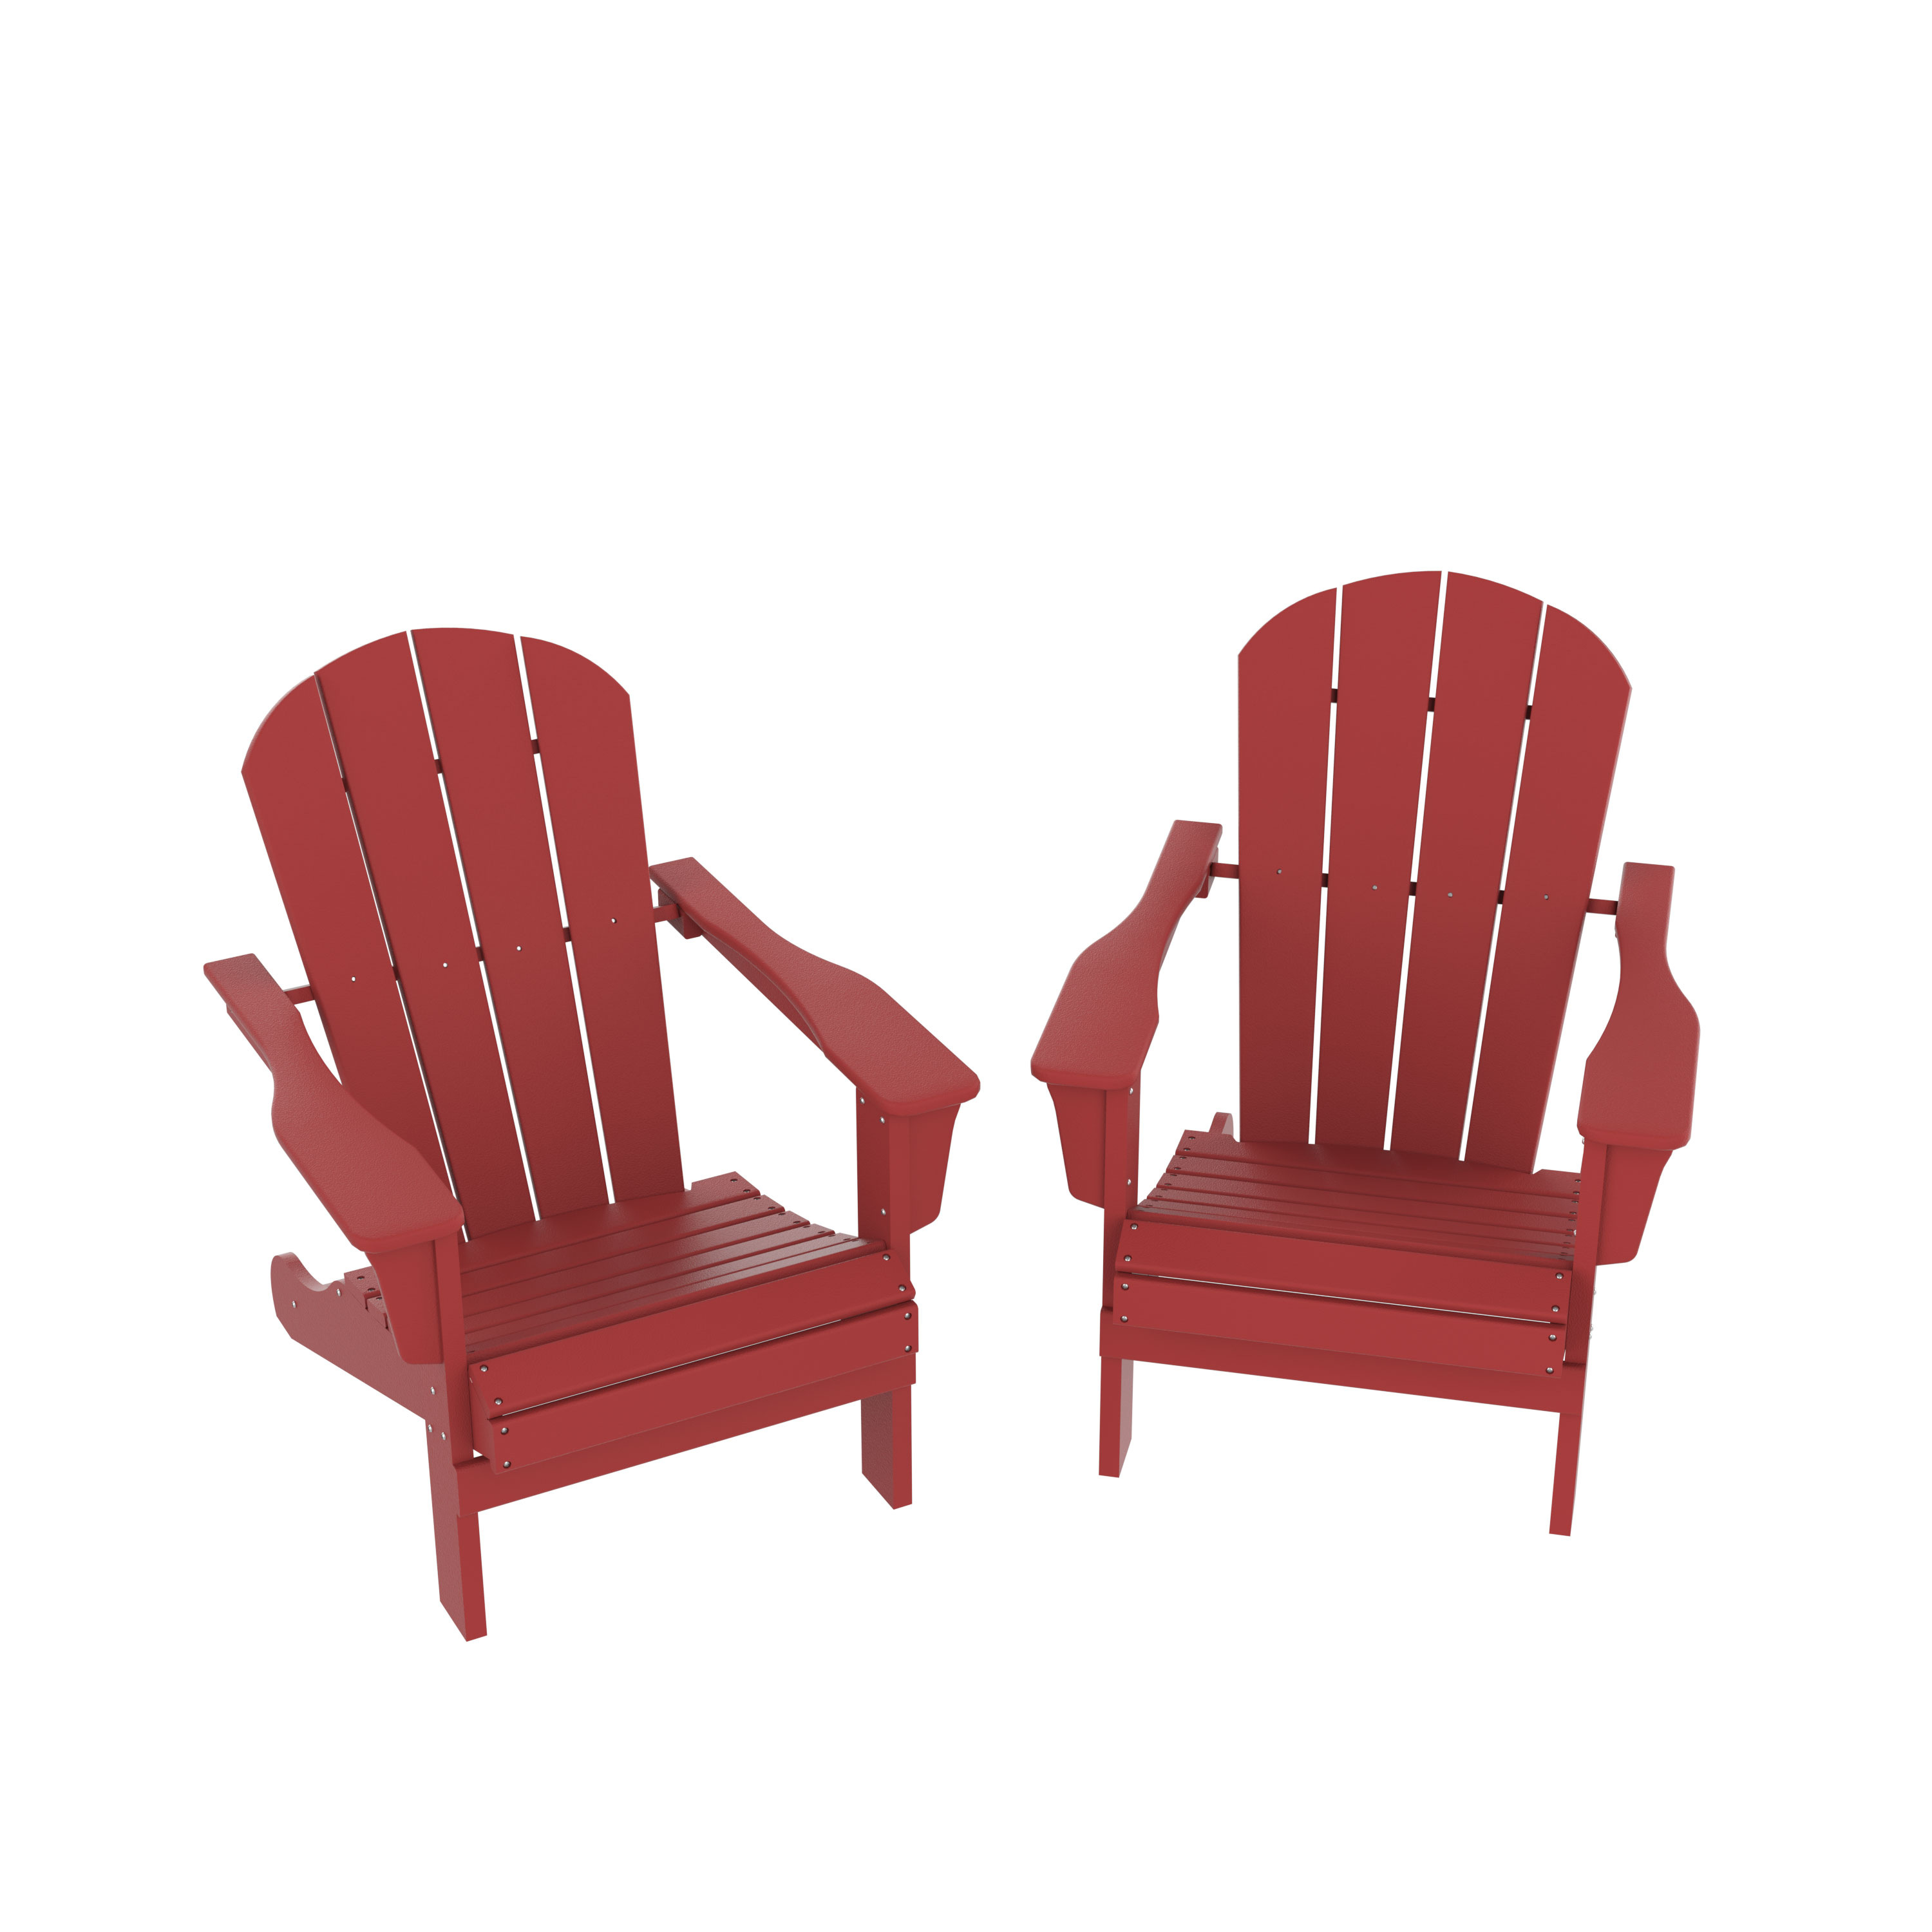 CoSoTower Adirondack Chair, Fire Pit Chairs, Sand Chair, Patio Outdoor Chairs, Dpe Plastic Resin Deck Chair, Lawn Chairs, Adult Size, Weather Resistant For Patio/ Backyard/Garden, Red, Set Of 2 - image 2 of 6